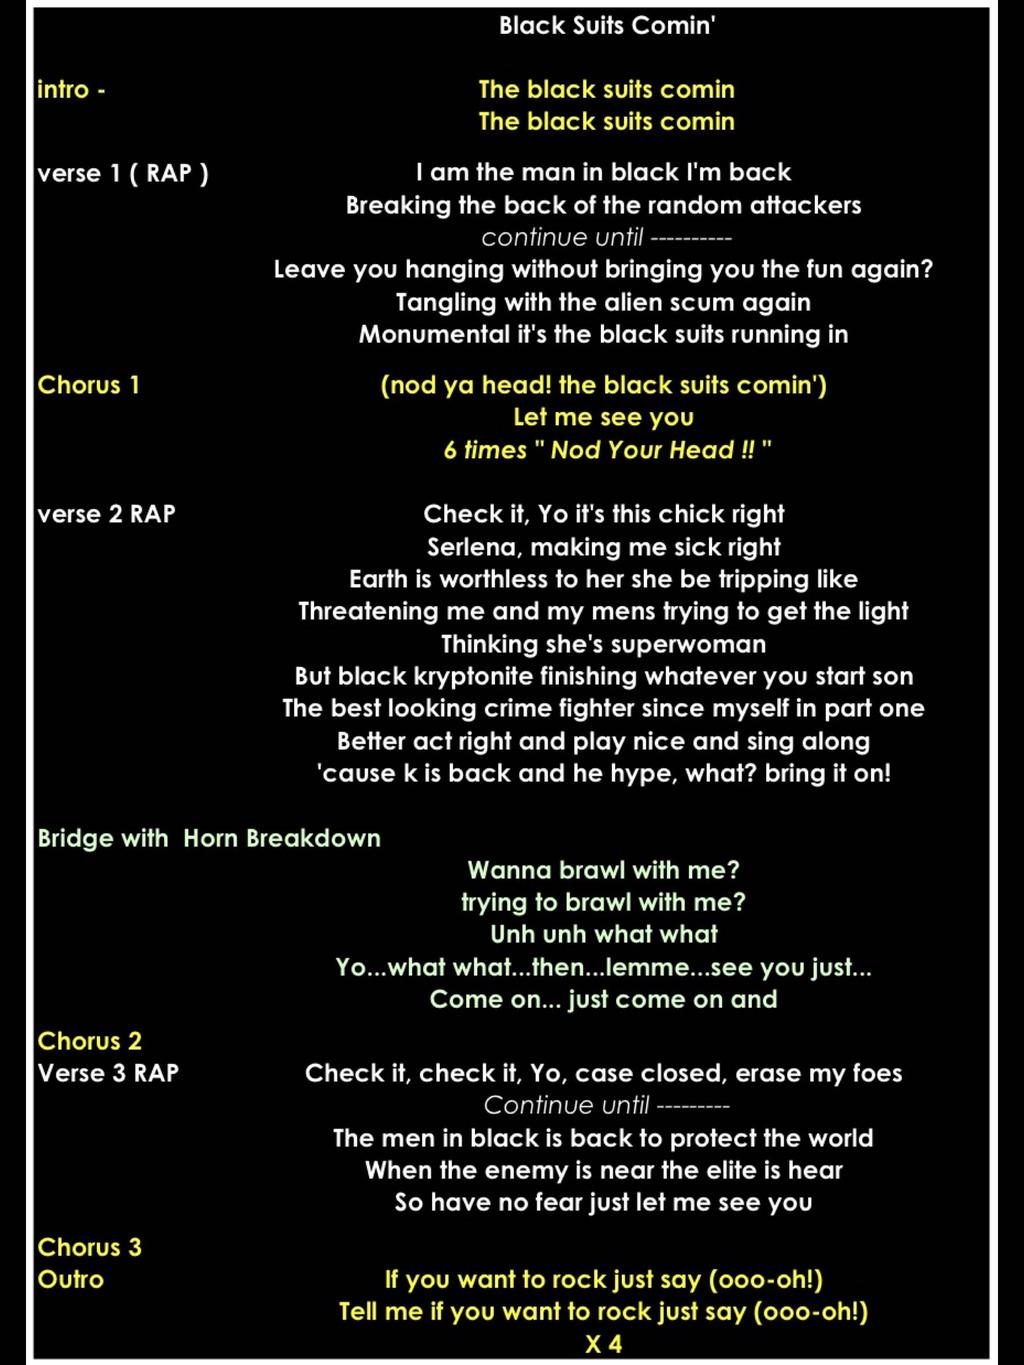 Black Suits Comin' intro - verse 1 ( RAP ) Chorus 1 verse 2 RAP am the man in black 'm back Breaking the back of the random attackers continue until ---------- Leave you hanging without bringing you